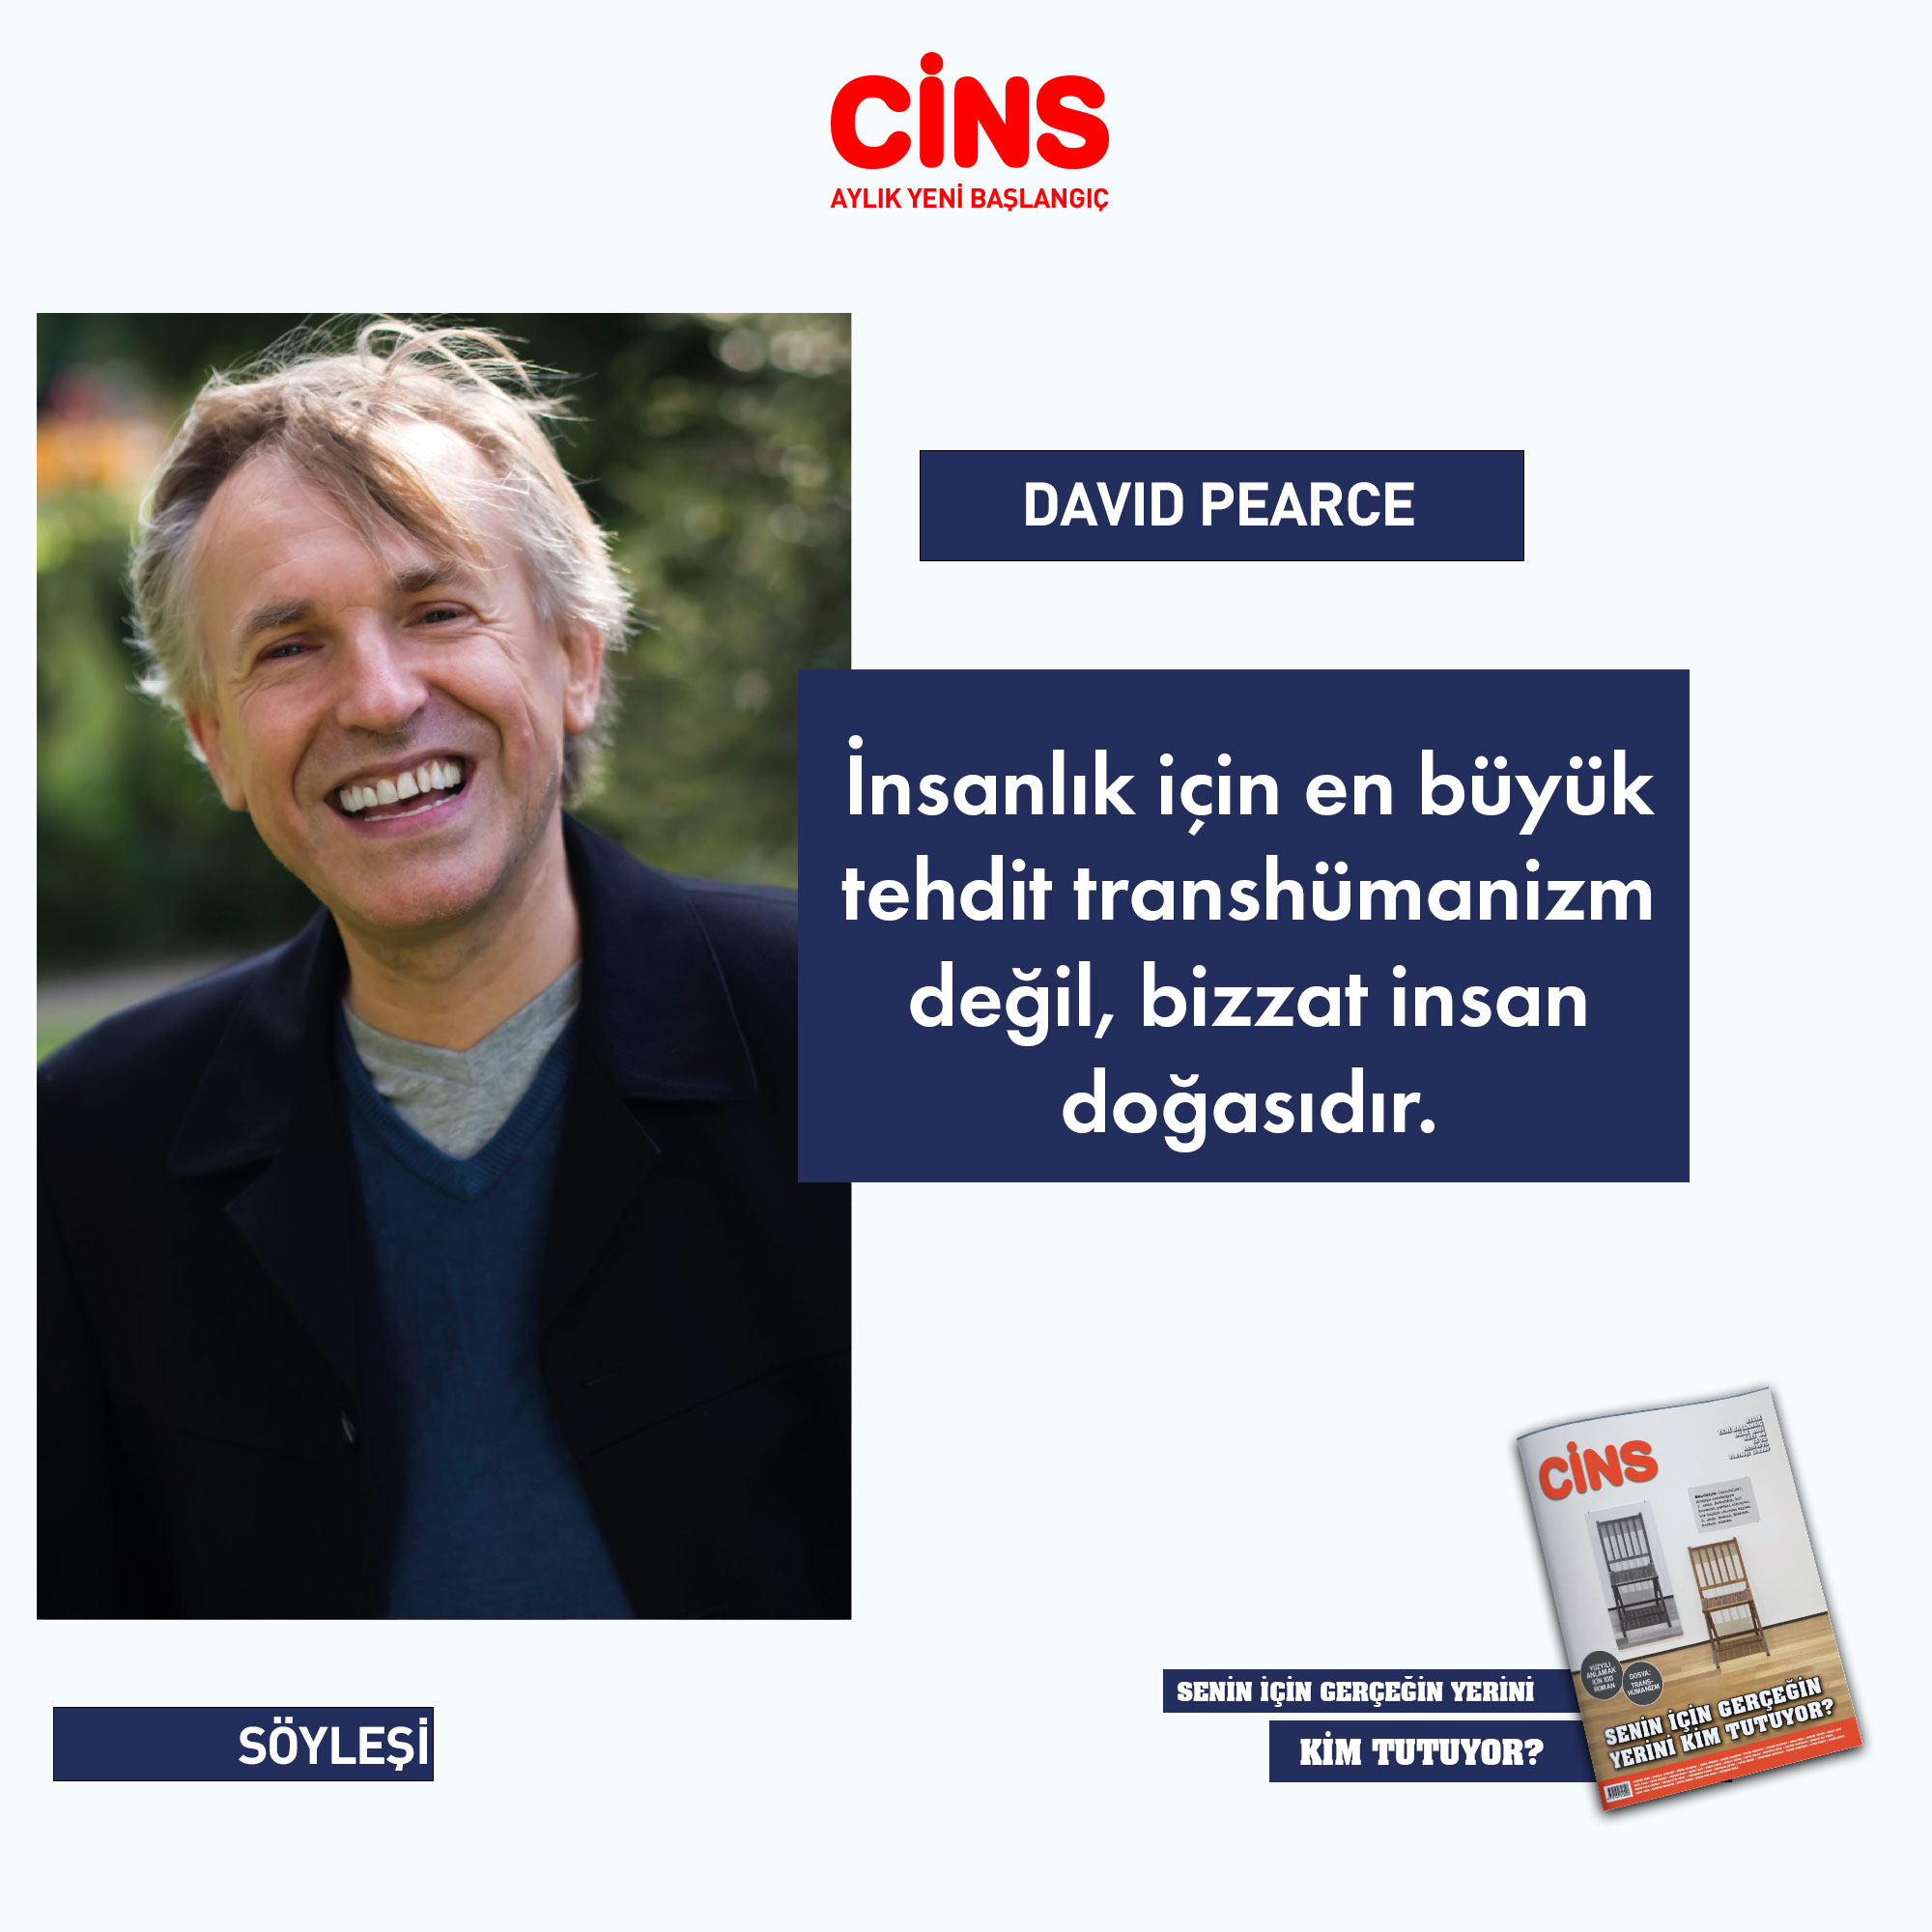 CINs magazine Interview with David Pearce